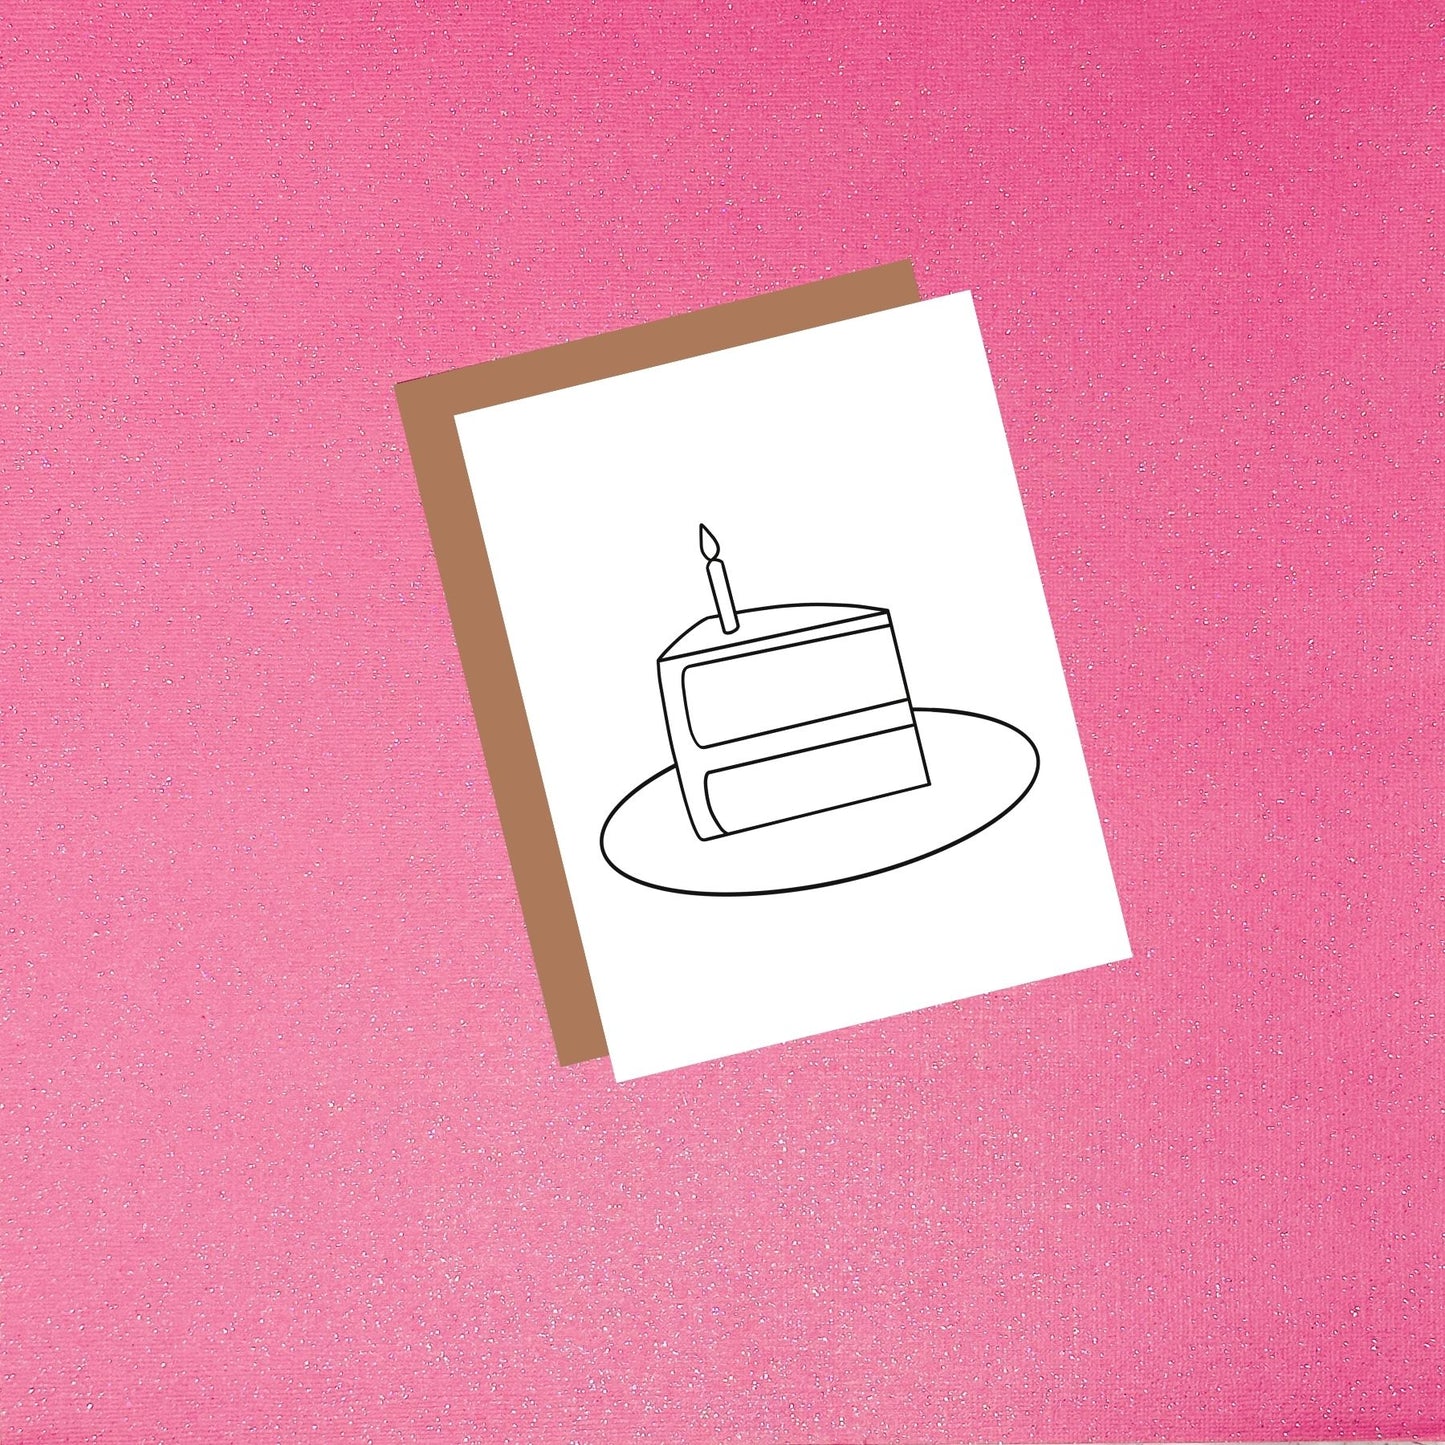 Coloring Card - Color Your Own Slice Of Cake